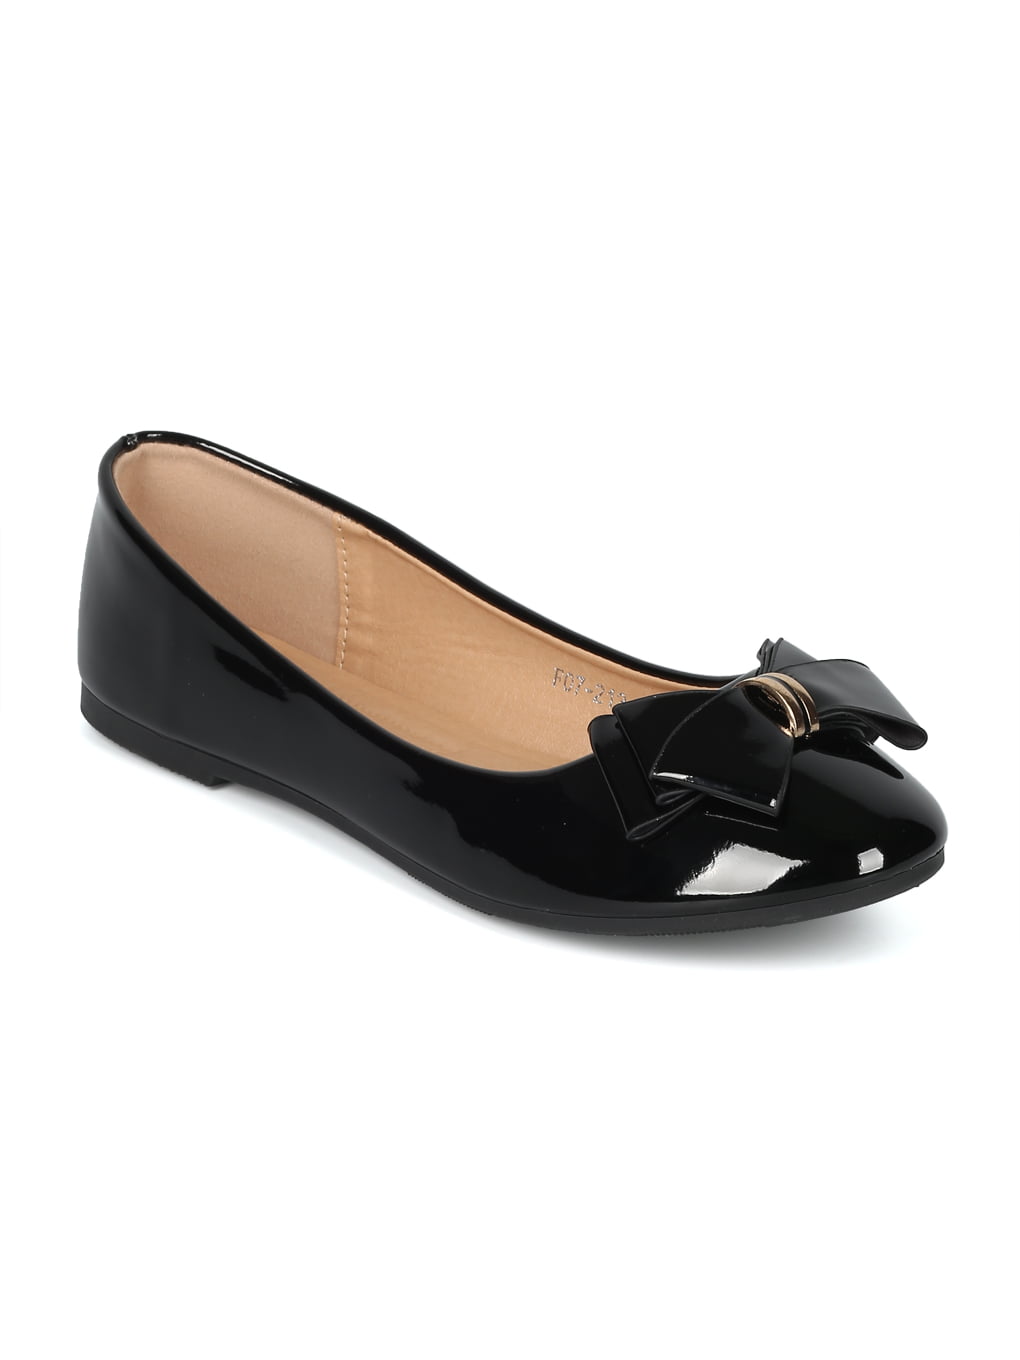 New Women Patent Leatherette Bow Tie Ballet Flat - 18050 By SBUP ...